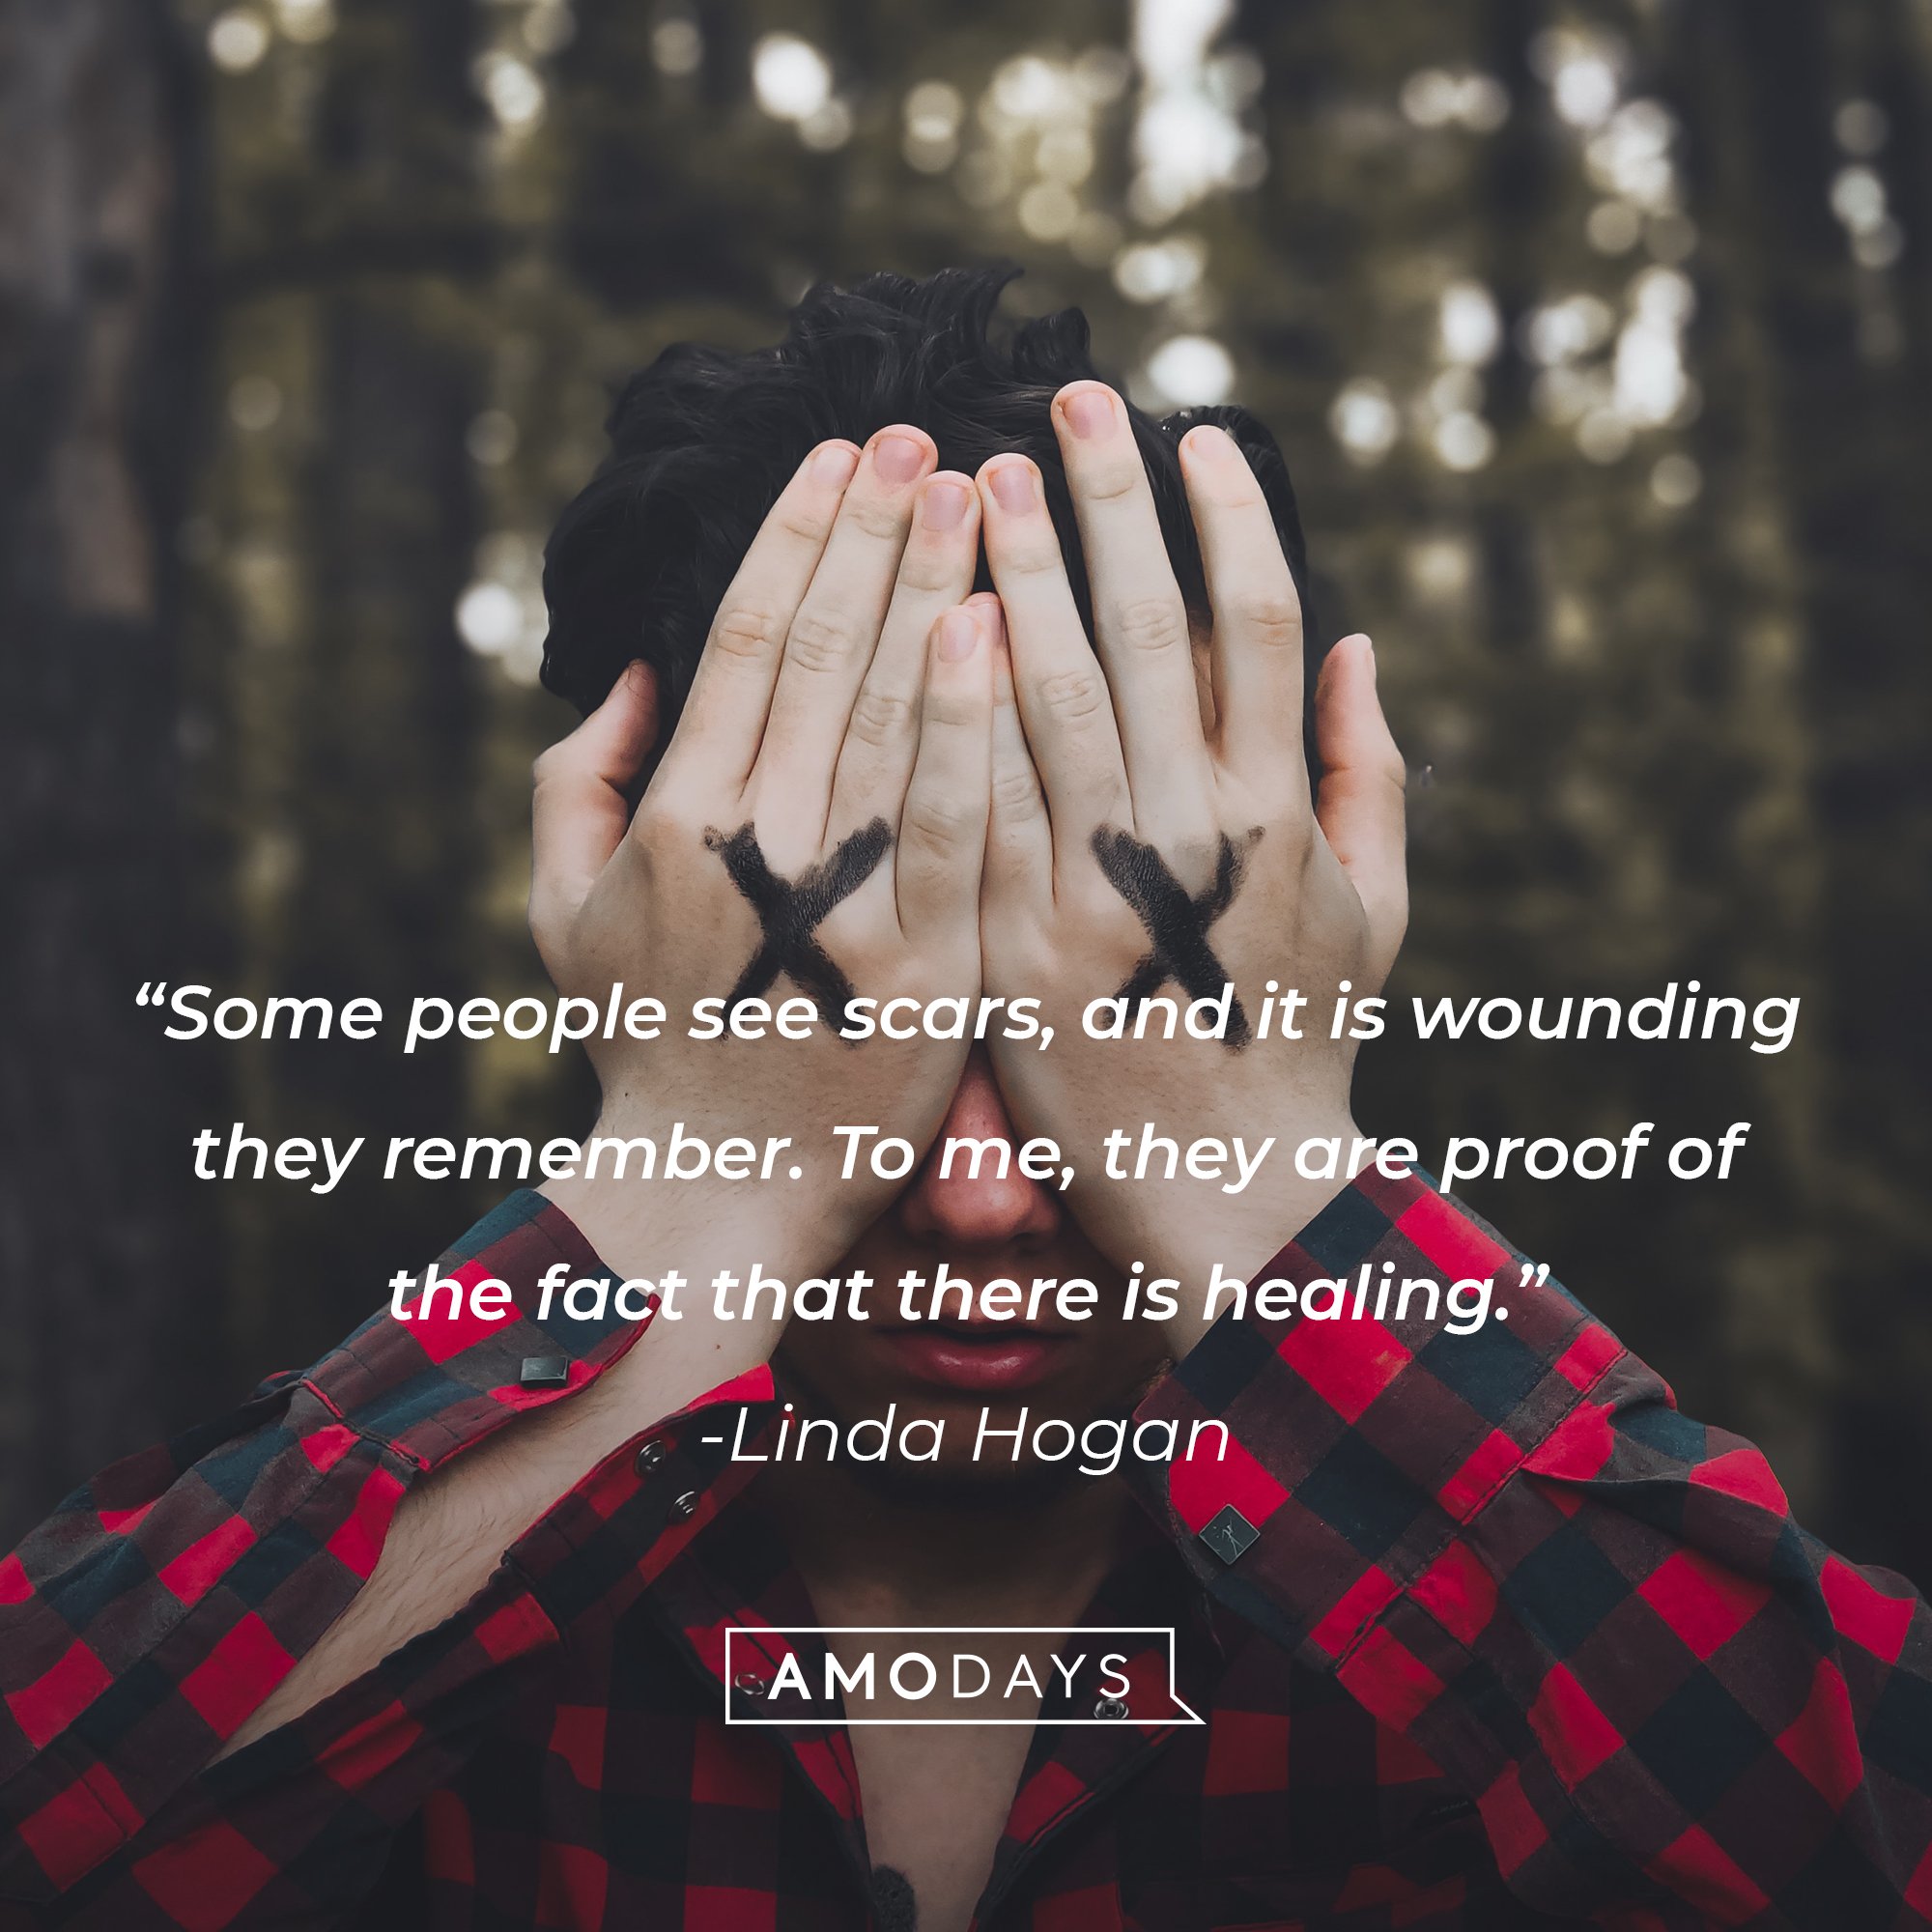 Linda Hogan's quote: "Some people see scars, and it is wounding they remember. To me they are proof of the fact that there is healing." | Image: AmoDays